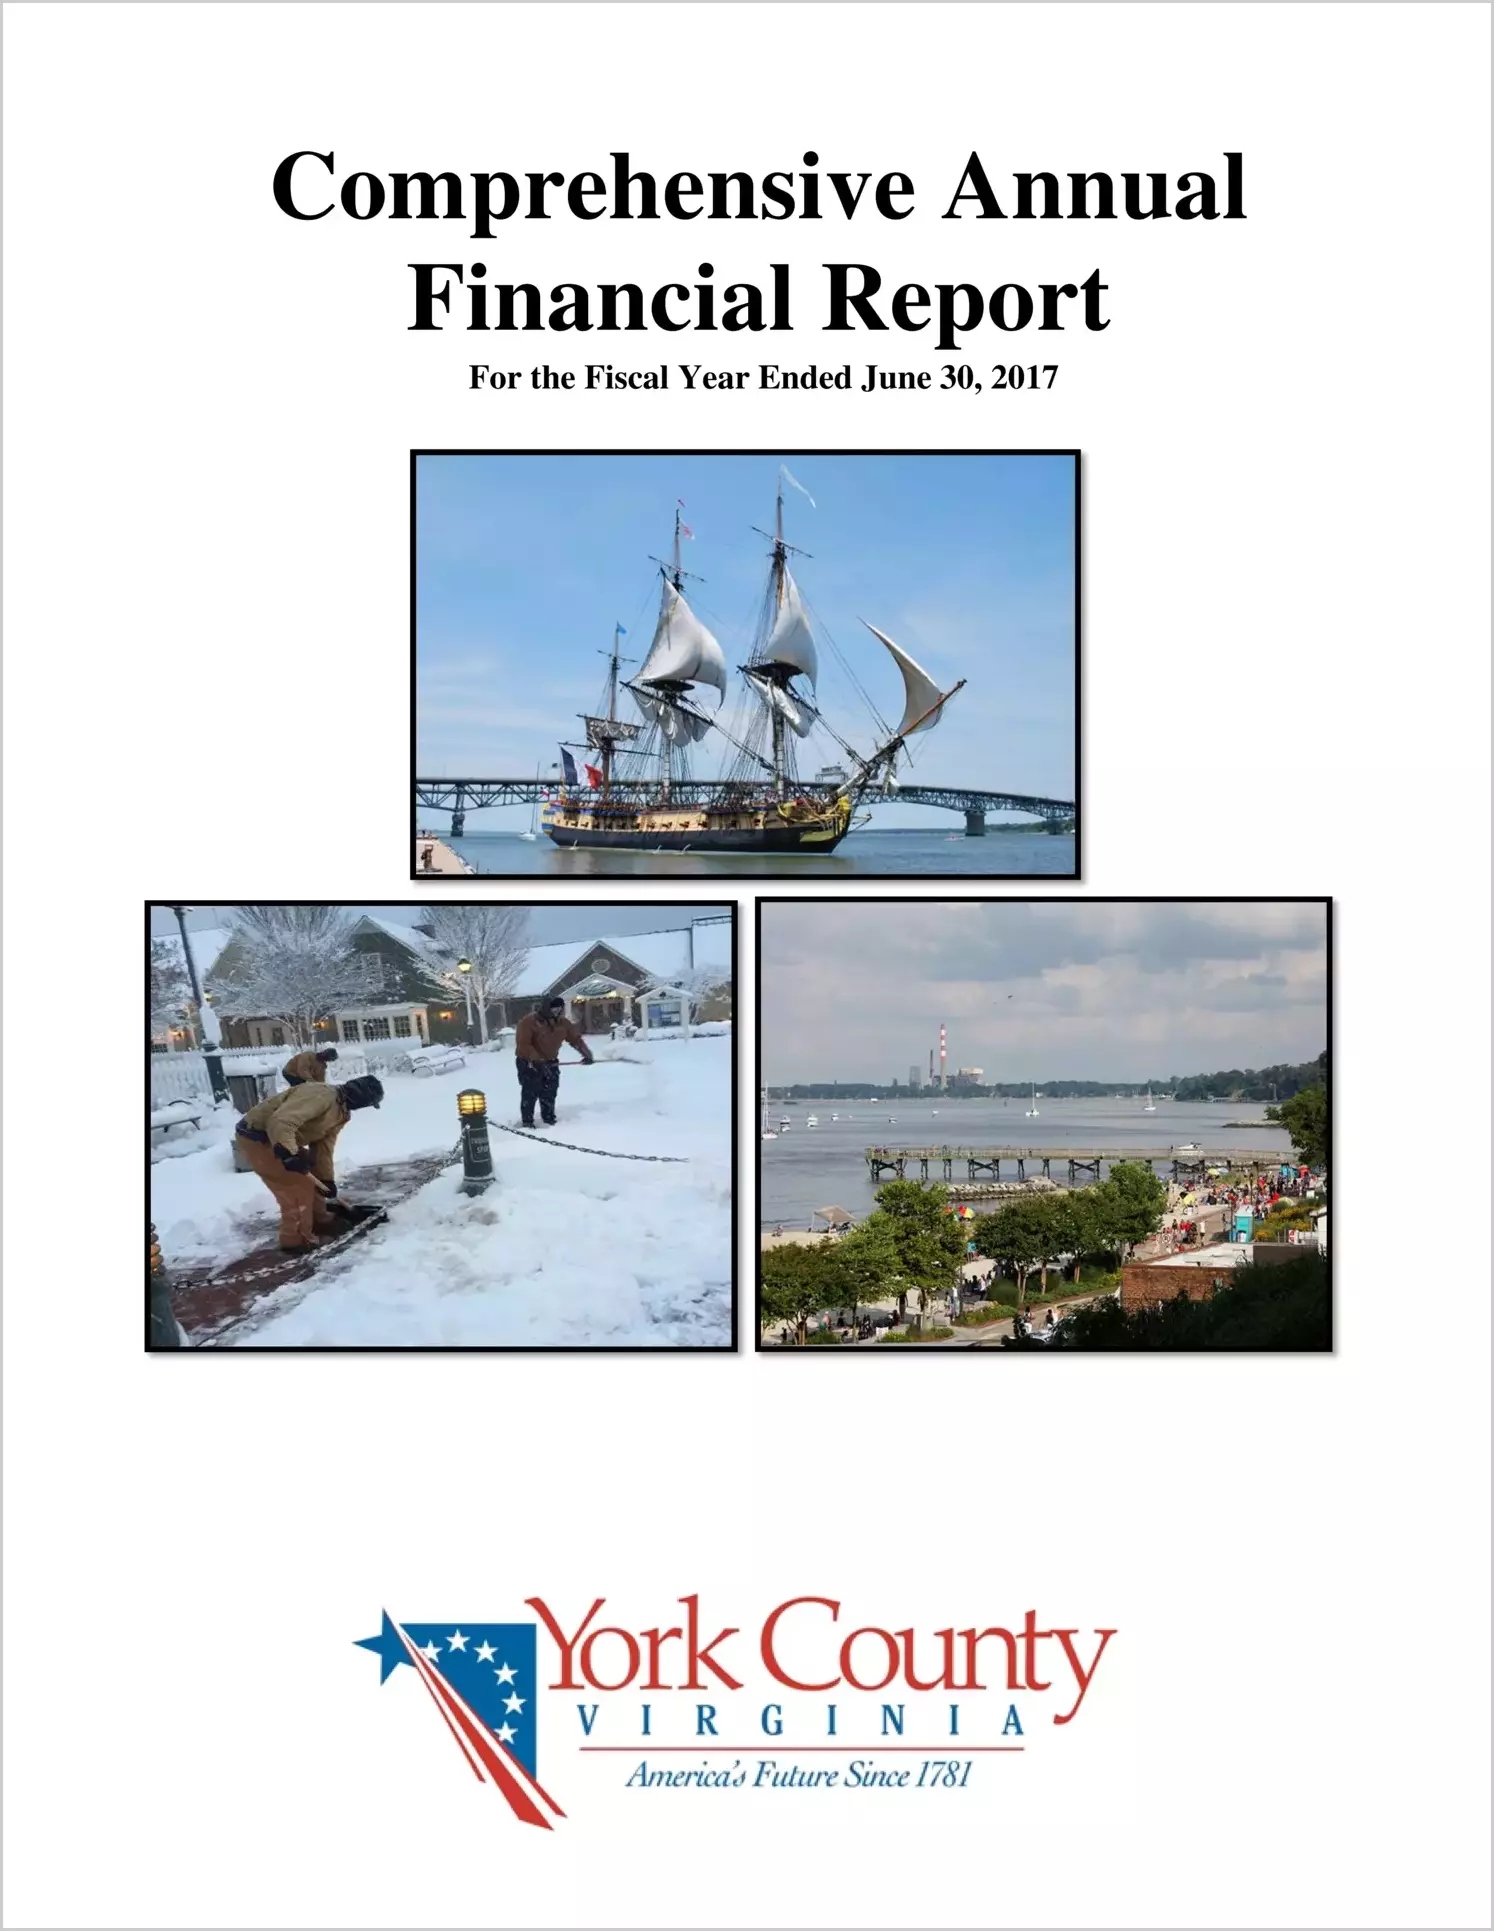 2017 Annual Financial Report for County of York